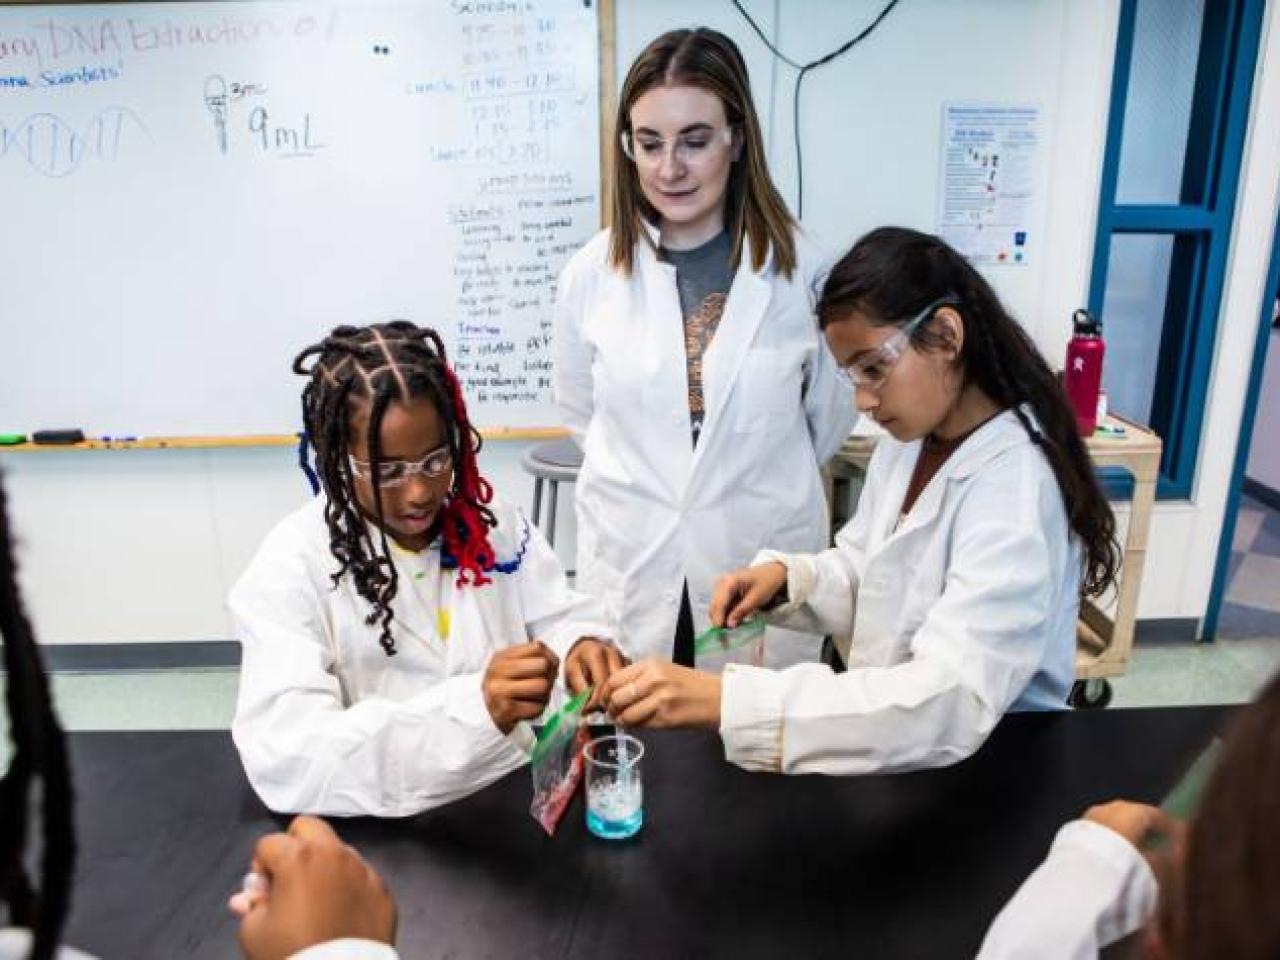 Staff Engineer Allie Duchnak works with students at San Diego's Elementary Institute of Science, as part of Illumina's Future is Bright campaign. | Photo: Kristy Walker